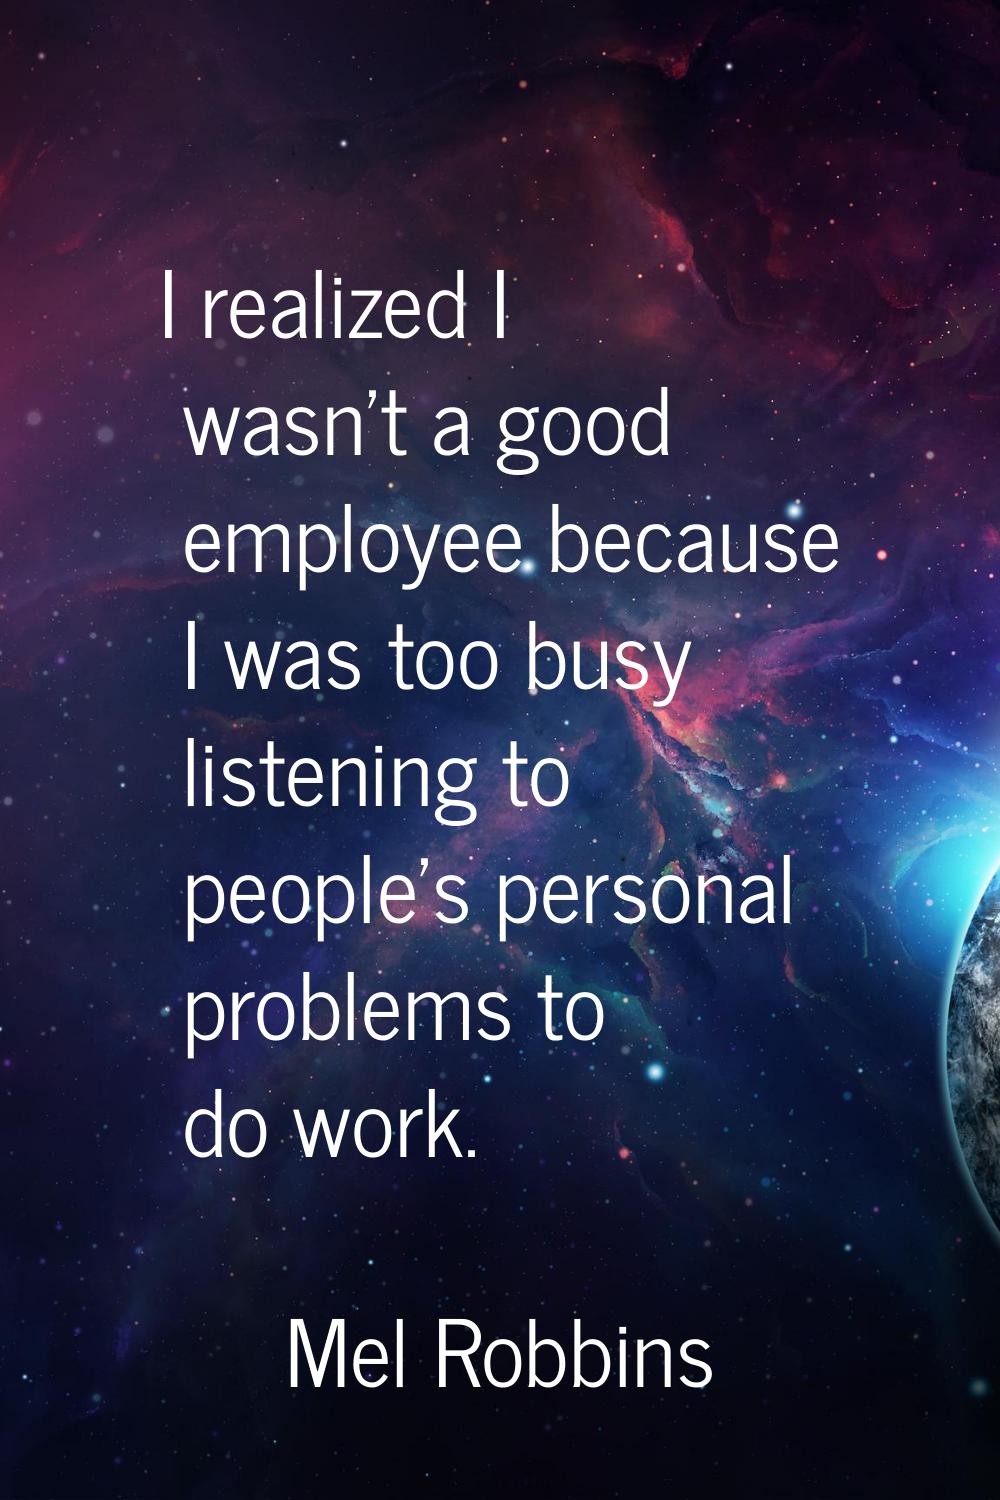 I realized I wasn't a good employee because I was too busy listening to people's personal problems 